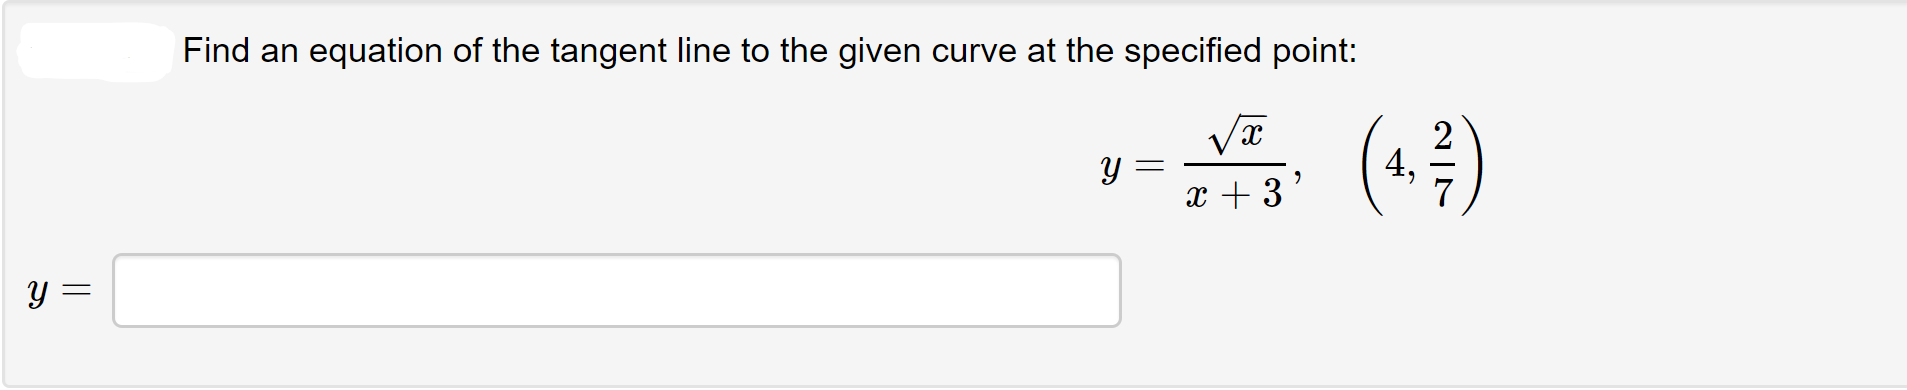 Find an equation of the tangent line to the given curve at the specified point:
4,
x + 3
y =
